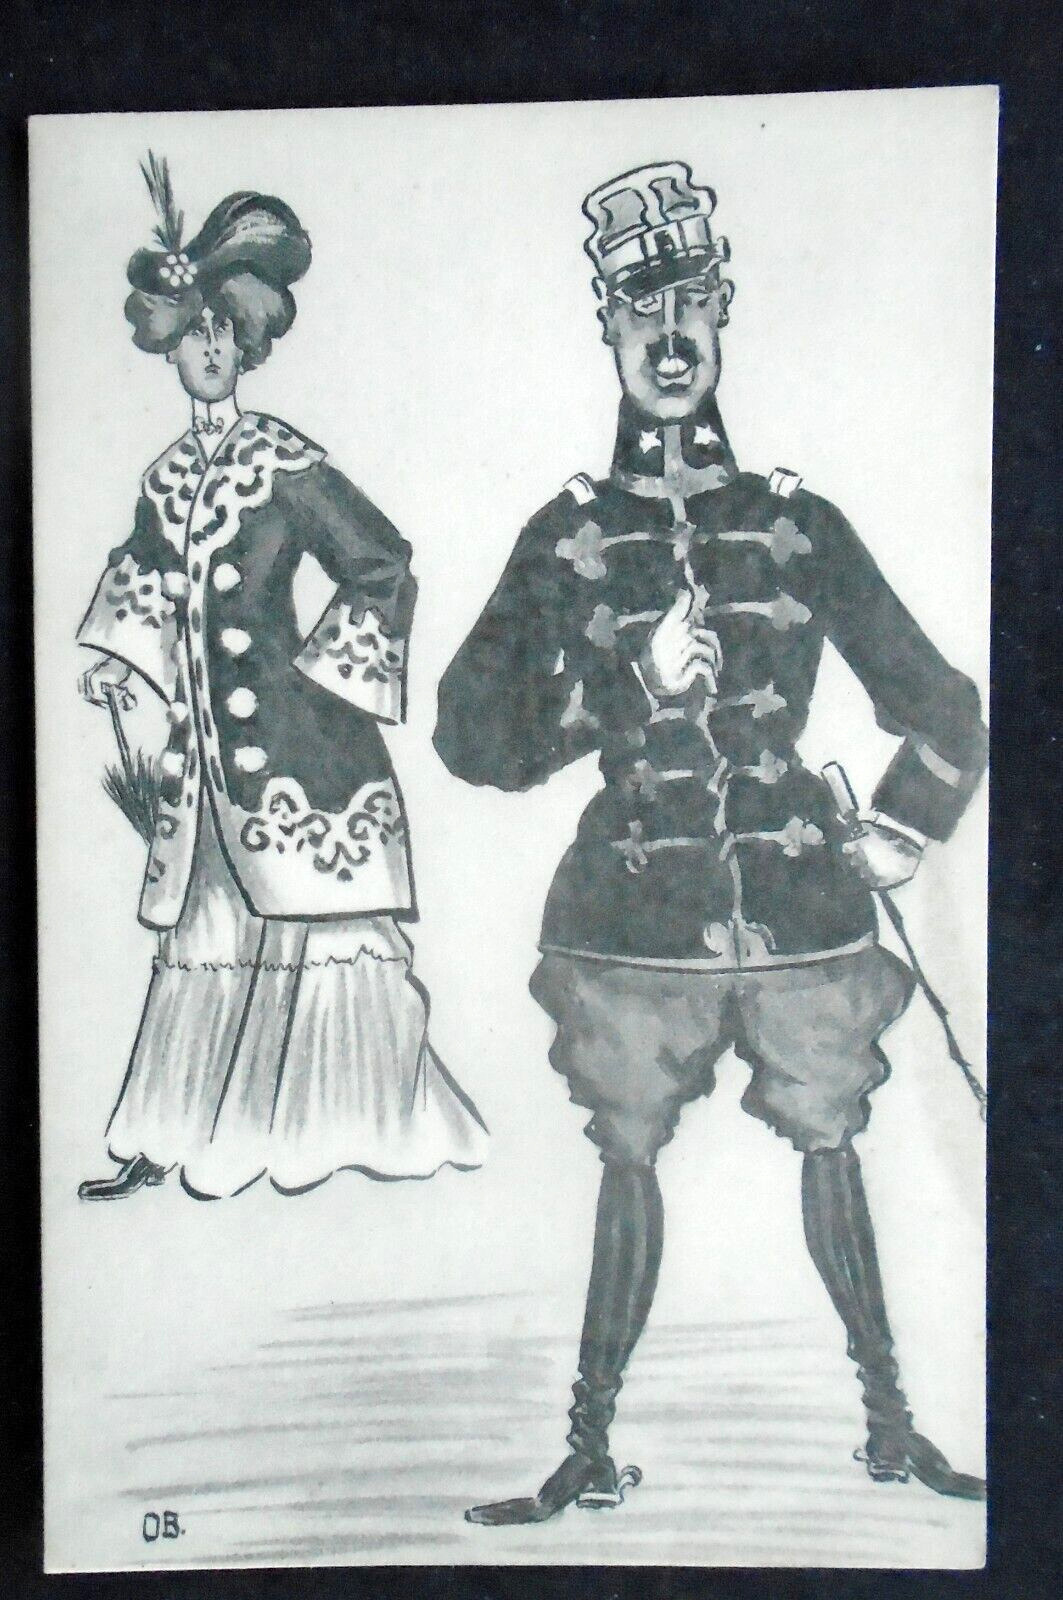 Early Military Humor, Soldier & Well Dressed Lady, circa 1900